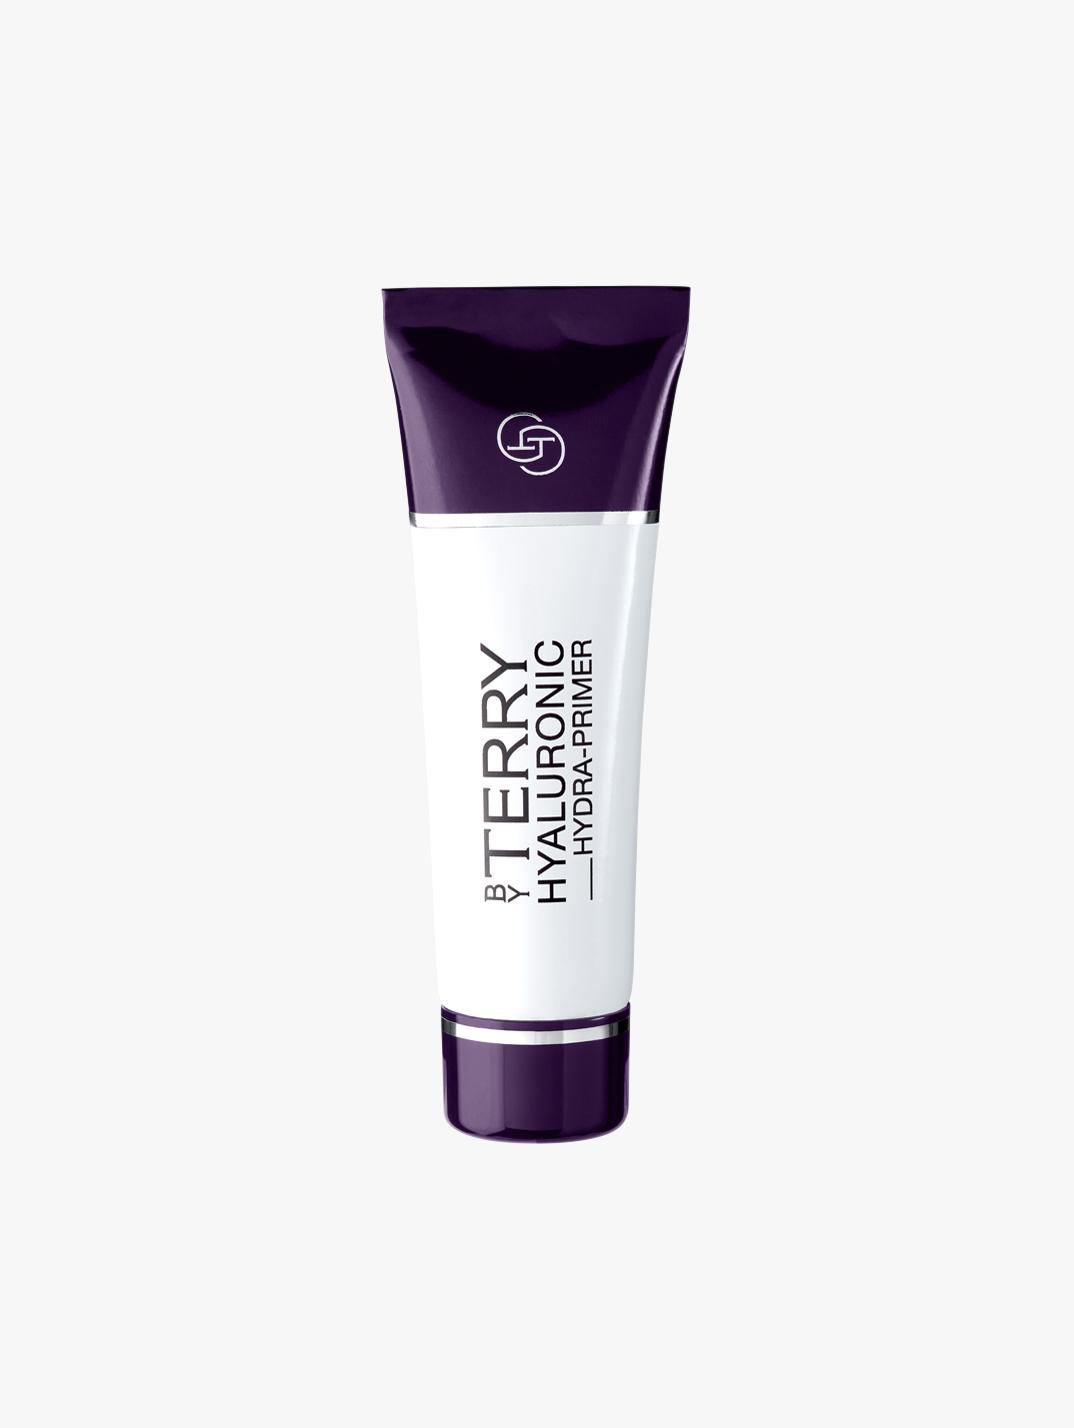 BY TERRY Hyaluronic Global Face Cream 1.69 oz.